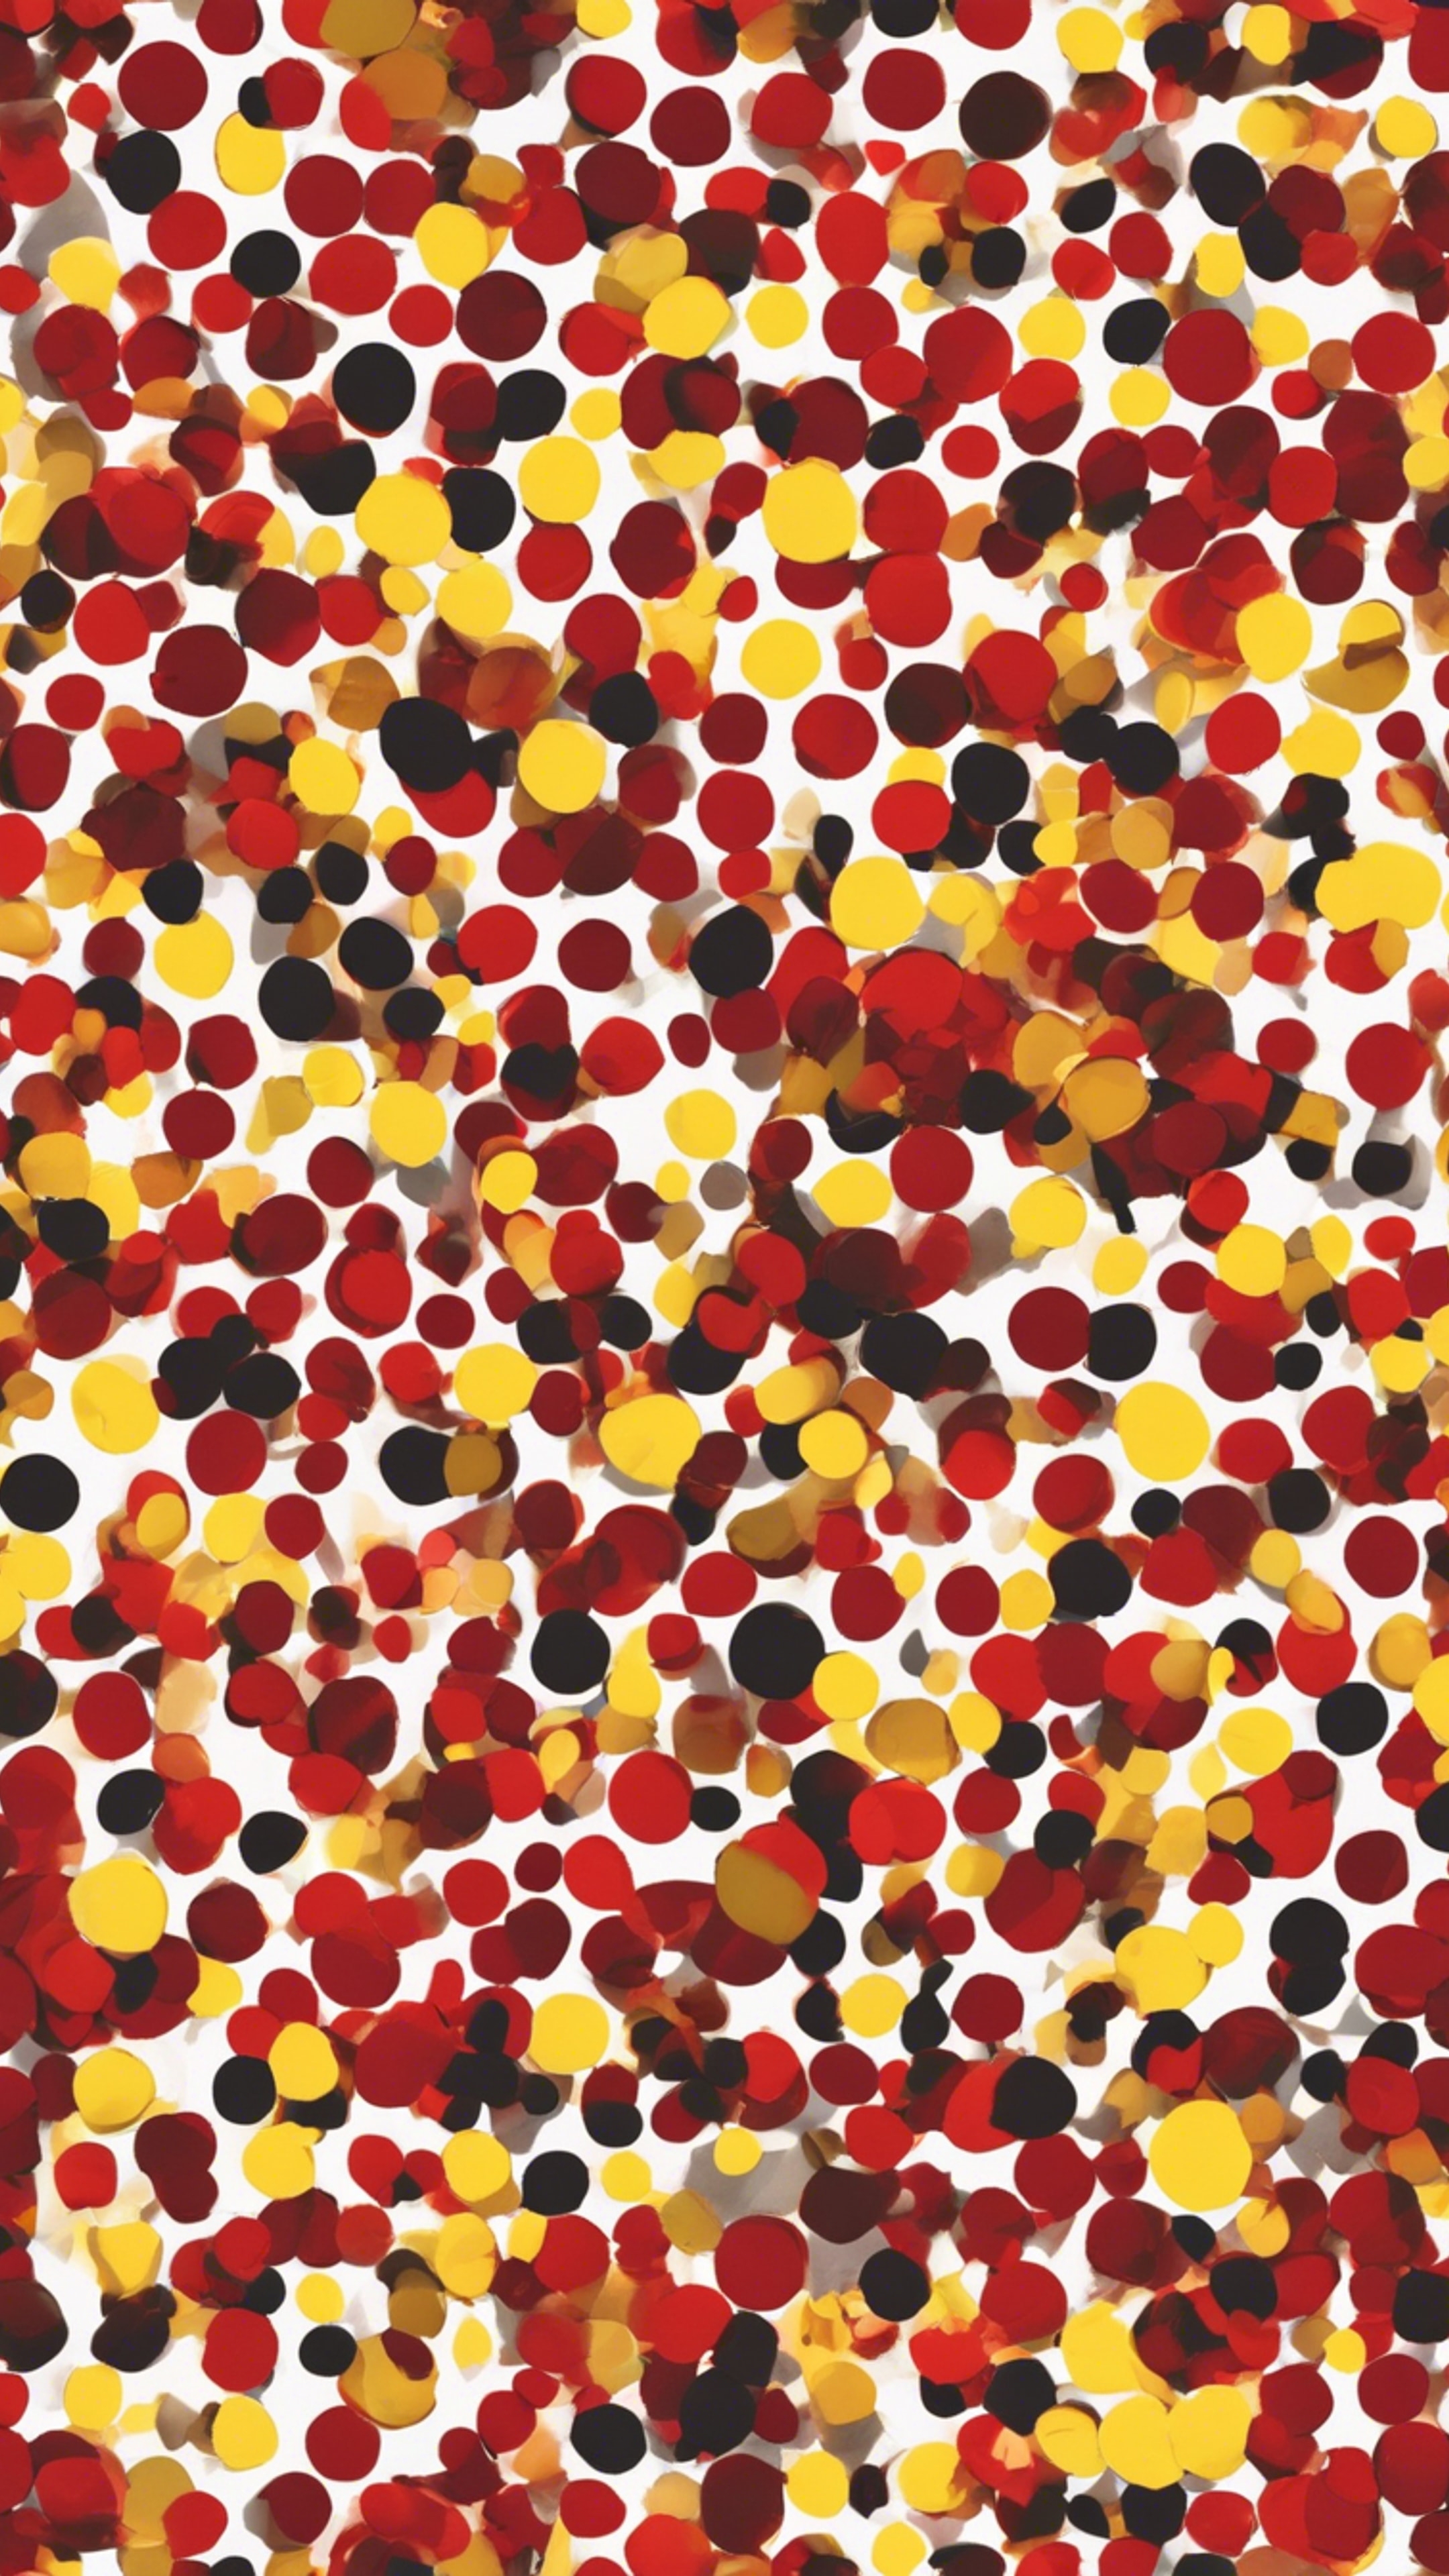 Scattered polka dots, small red ones and large yellow ones, in a seamless pattern. 벽지[491989b84cbb438494fe]